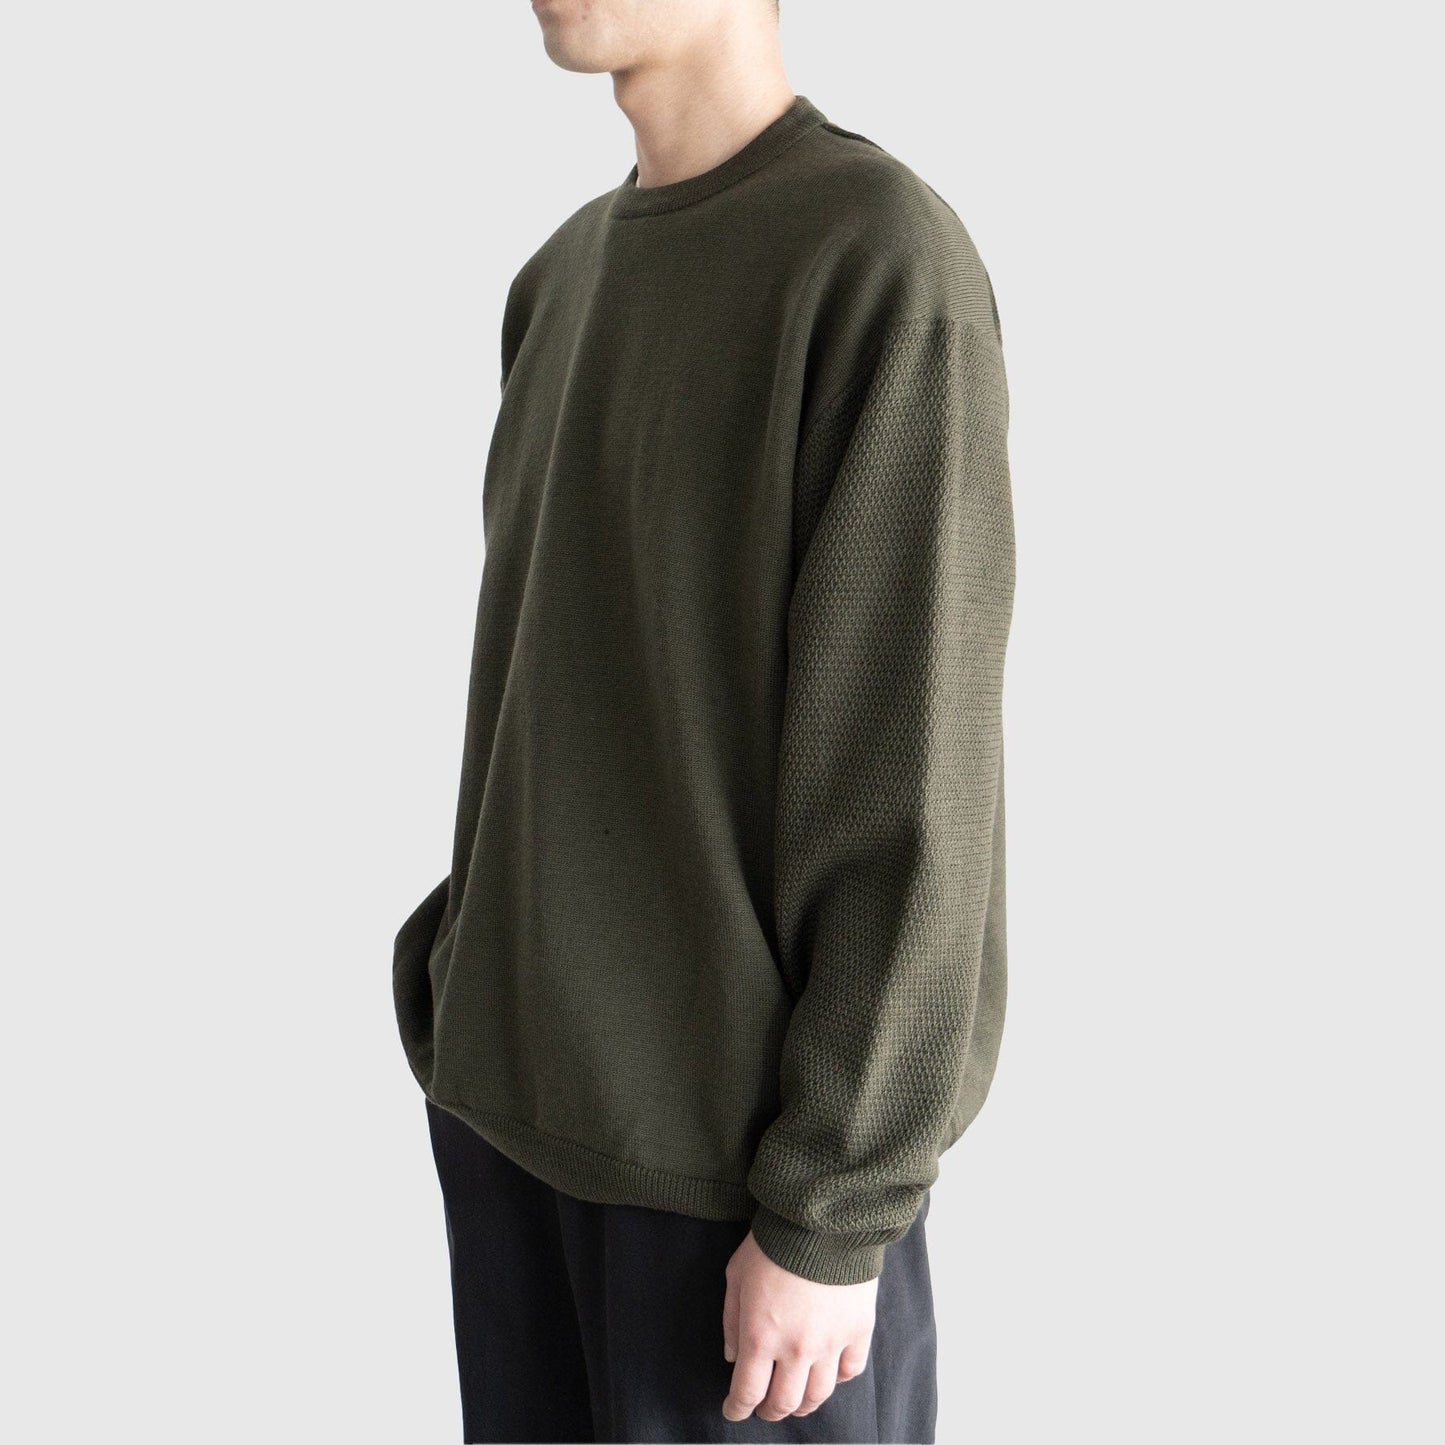 Still By Hand 10G Patterned Sweater - Olive Knitwear Still By Hand 